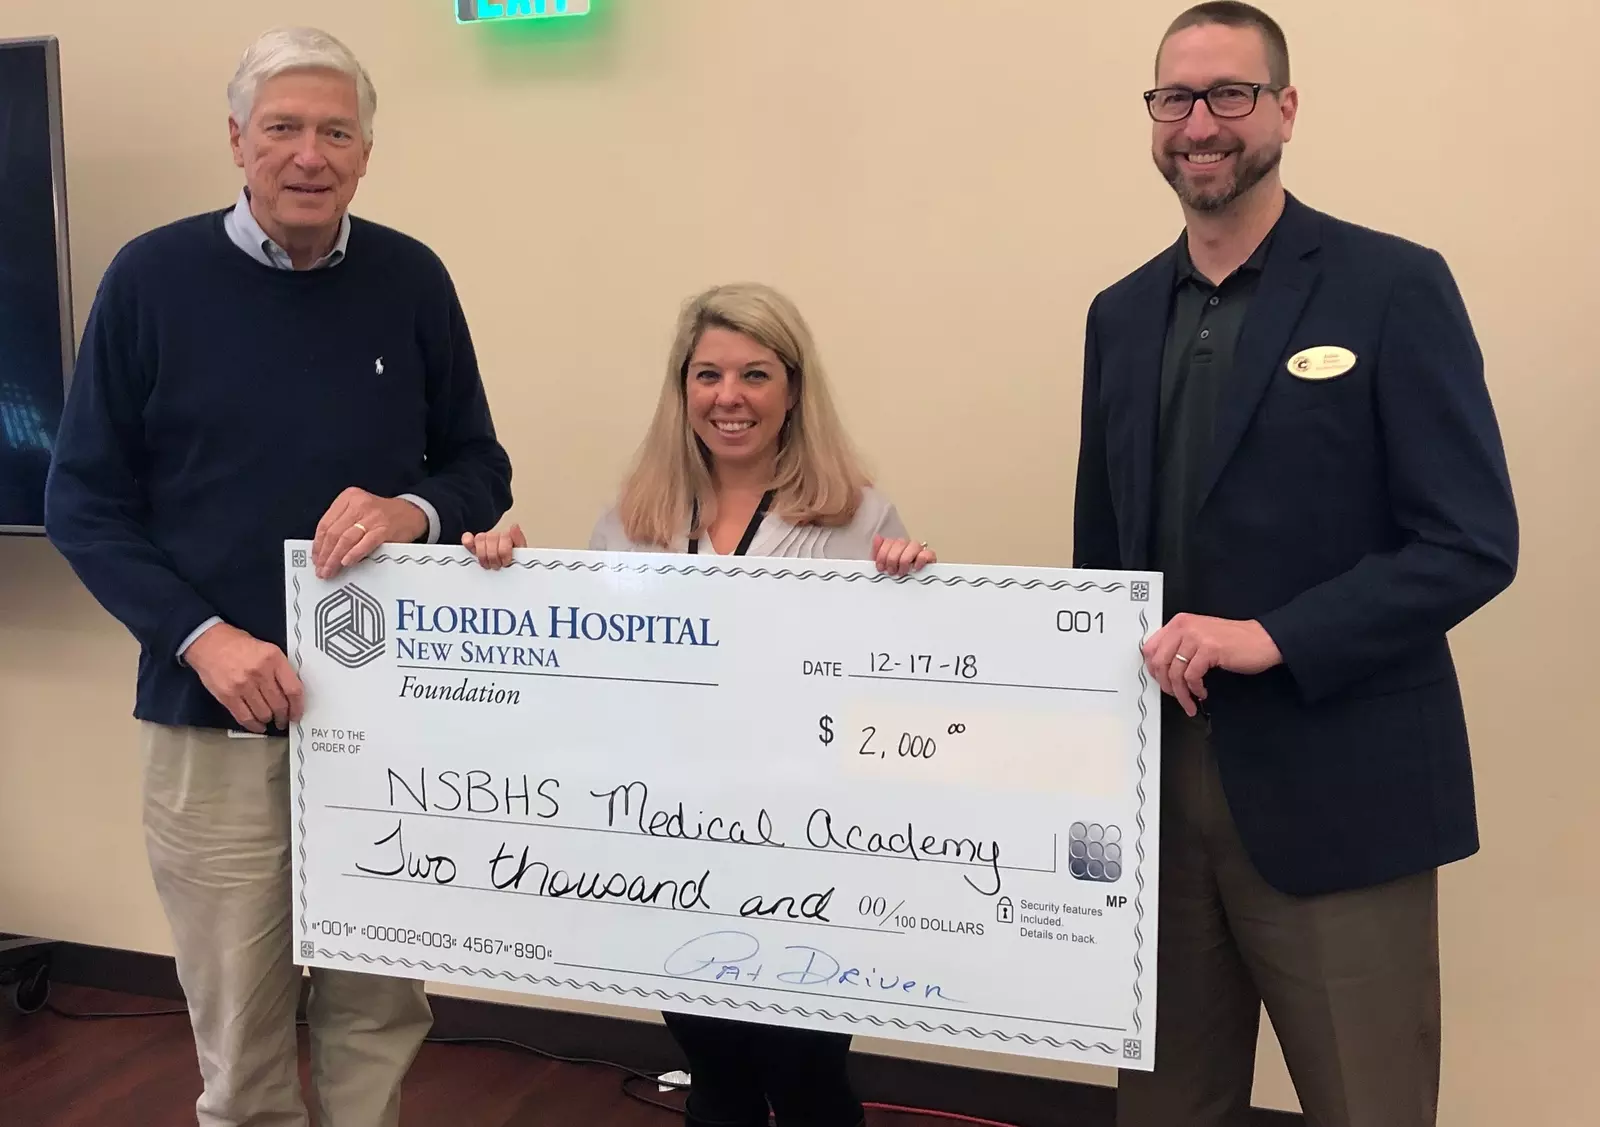 Pictured from left to right: Pat Driver, AdventHealth New Smyrna Beach Foundation chair, Lindsay Posick, New Smyrna Beach High School Medical Academy, and Julian Doster, New Smyrna Beach High School assistant principal. 